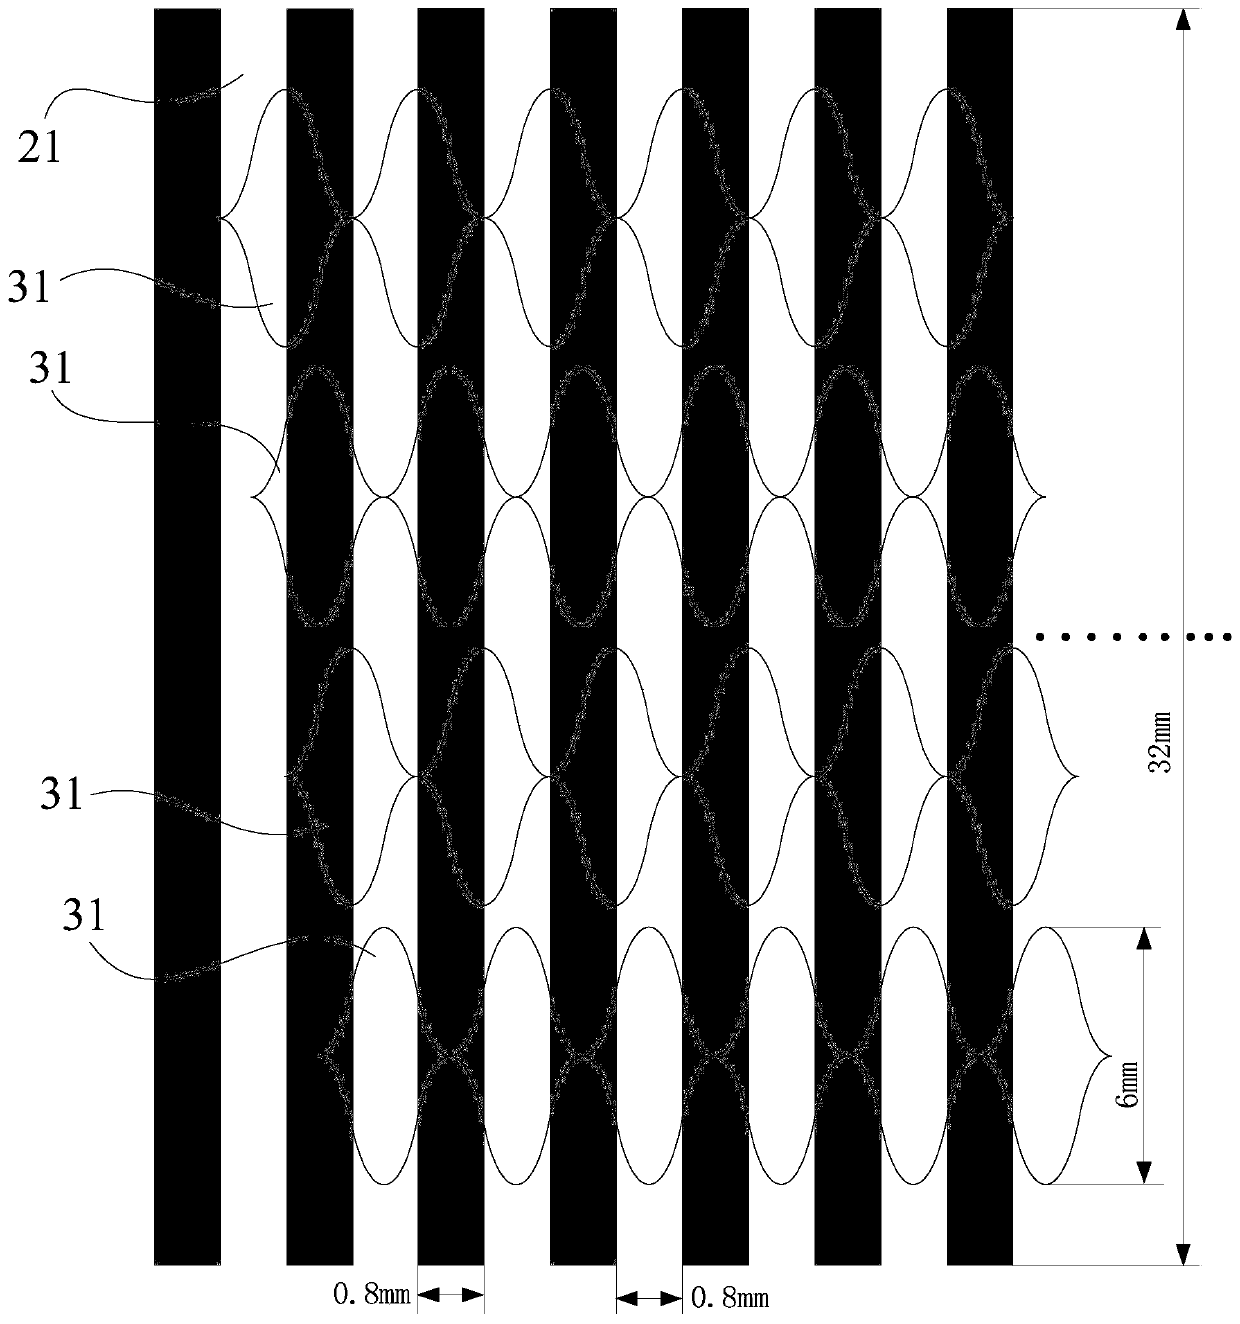 A Linear Displacement Measuring System Based on Alternating Light Field